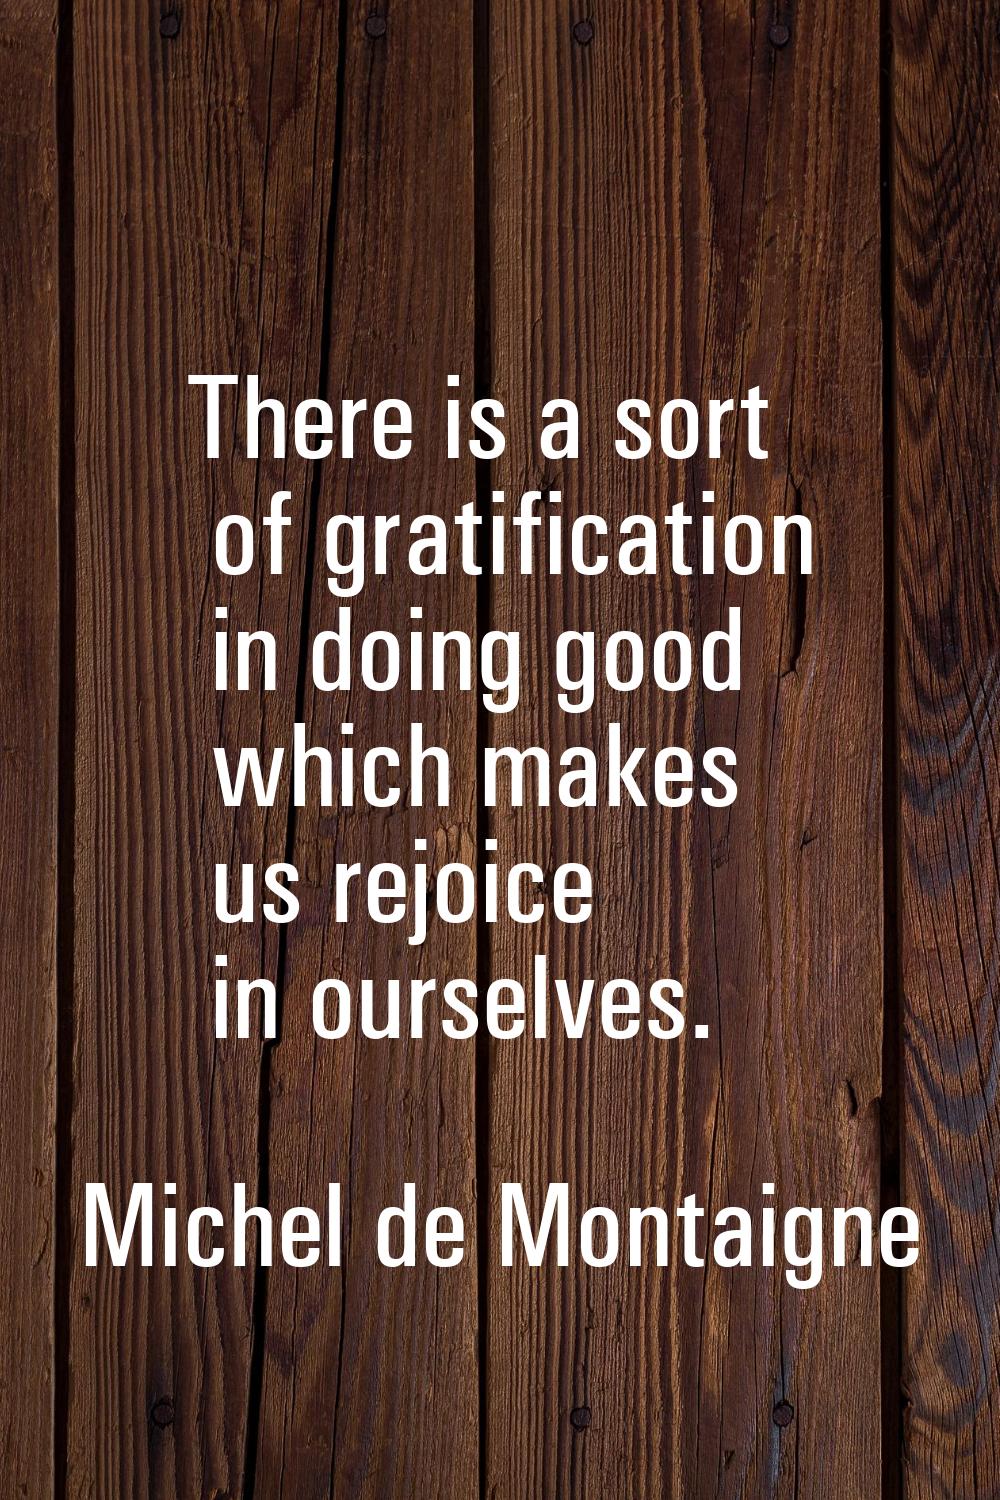 There is a sort of gratification in doing good which makes us rejoice in ourselves.